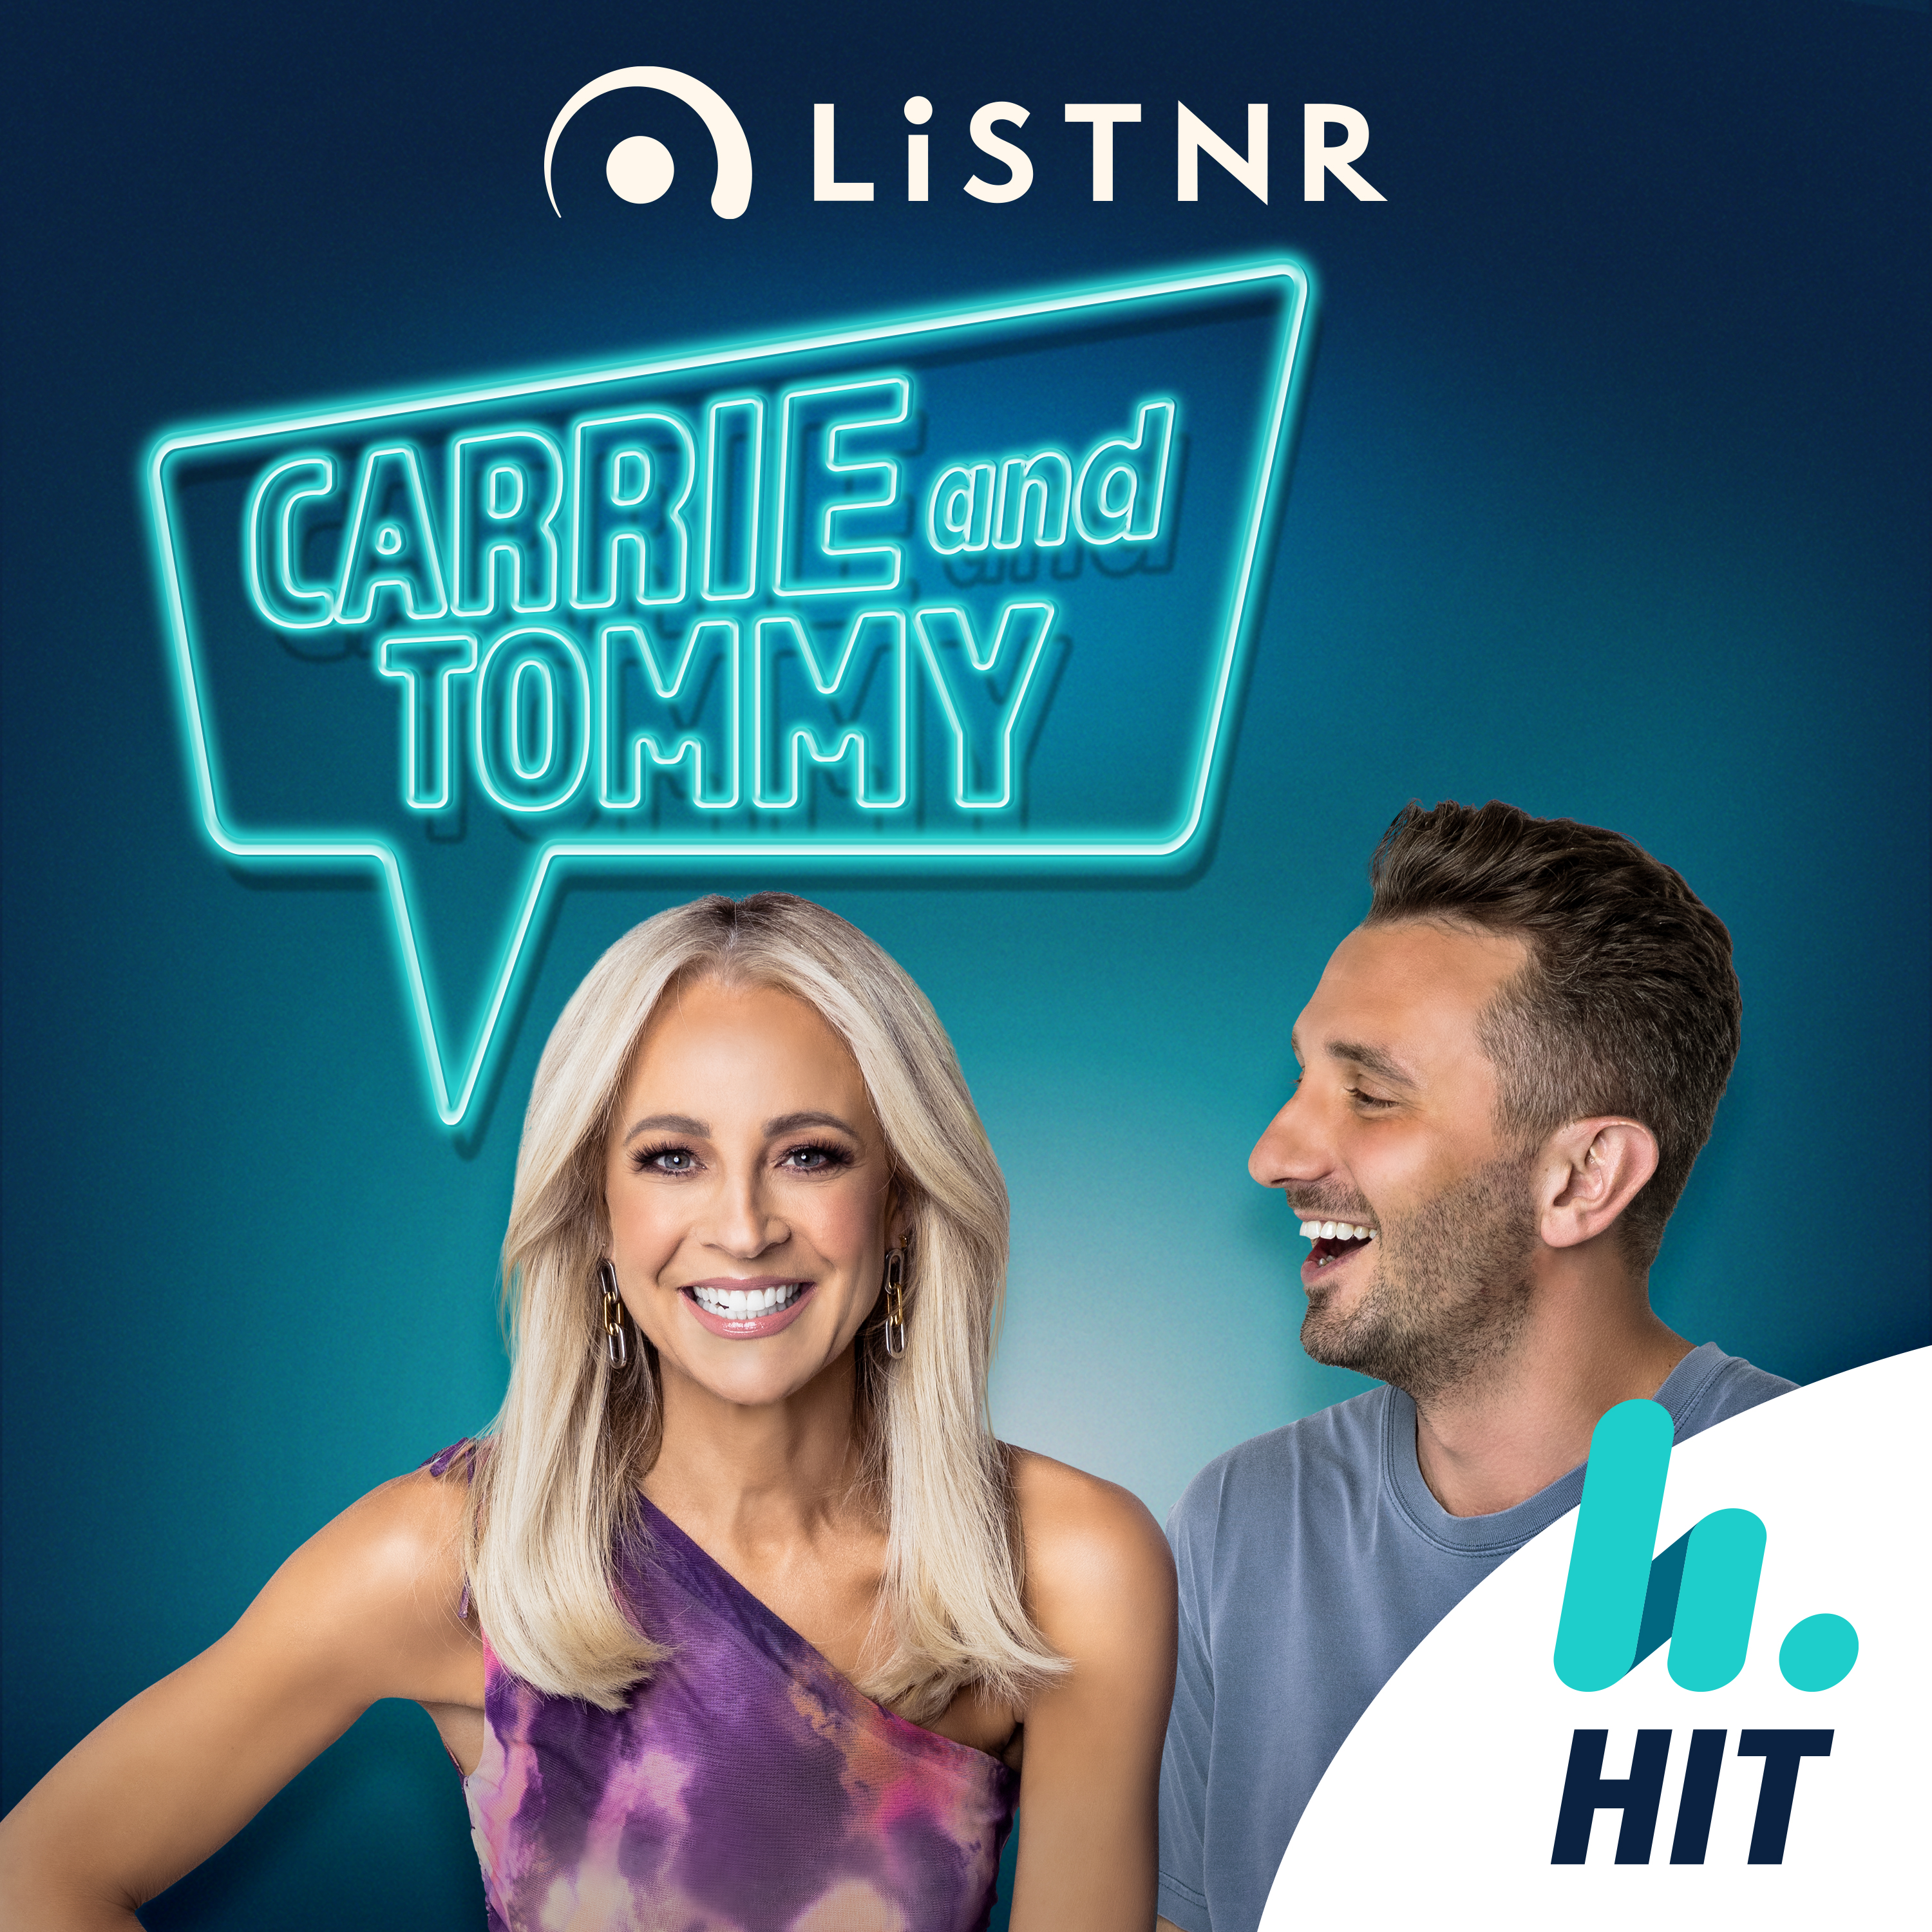 3:08 pm - Carrie & Tommy